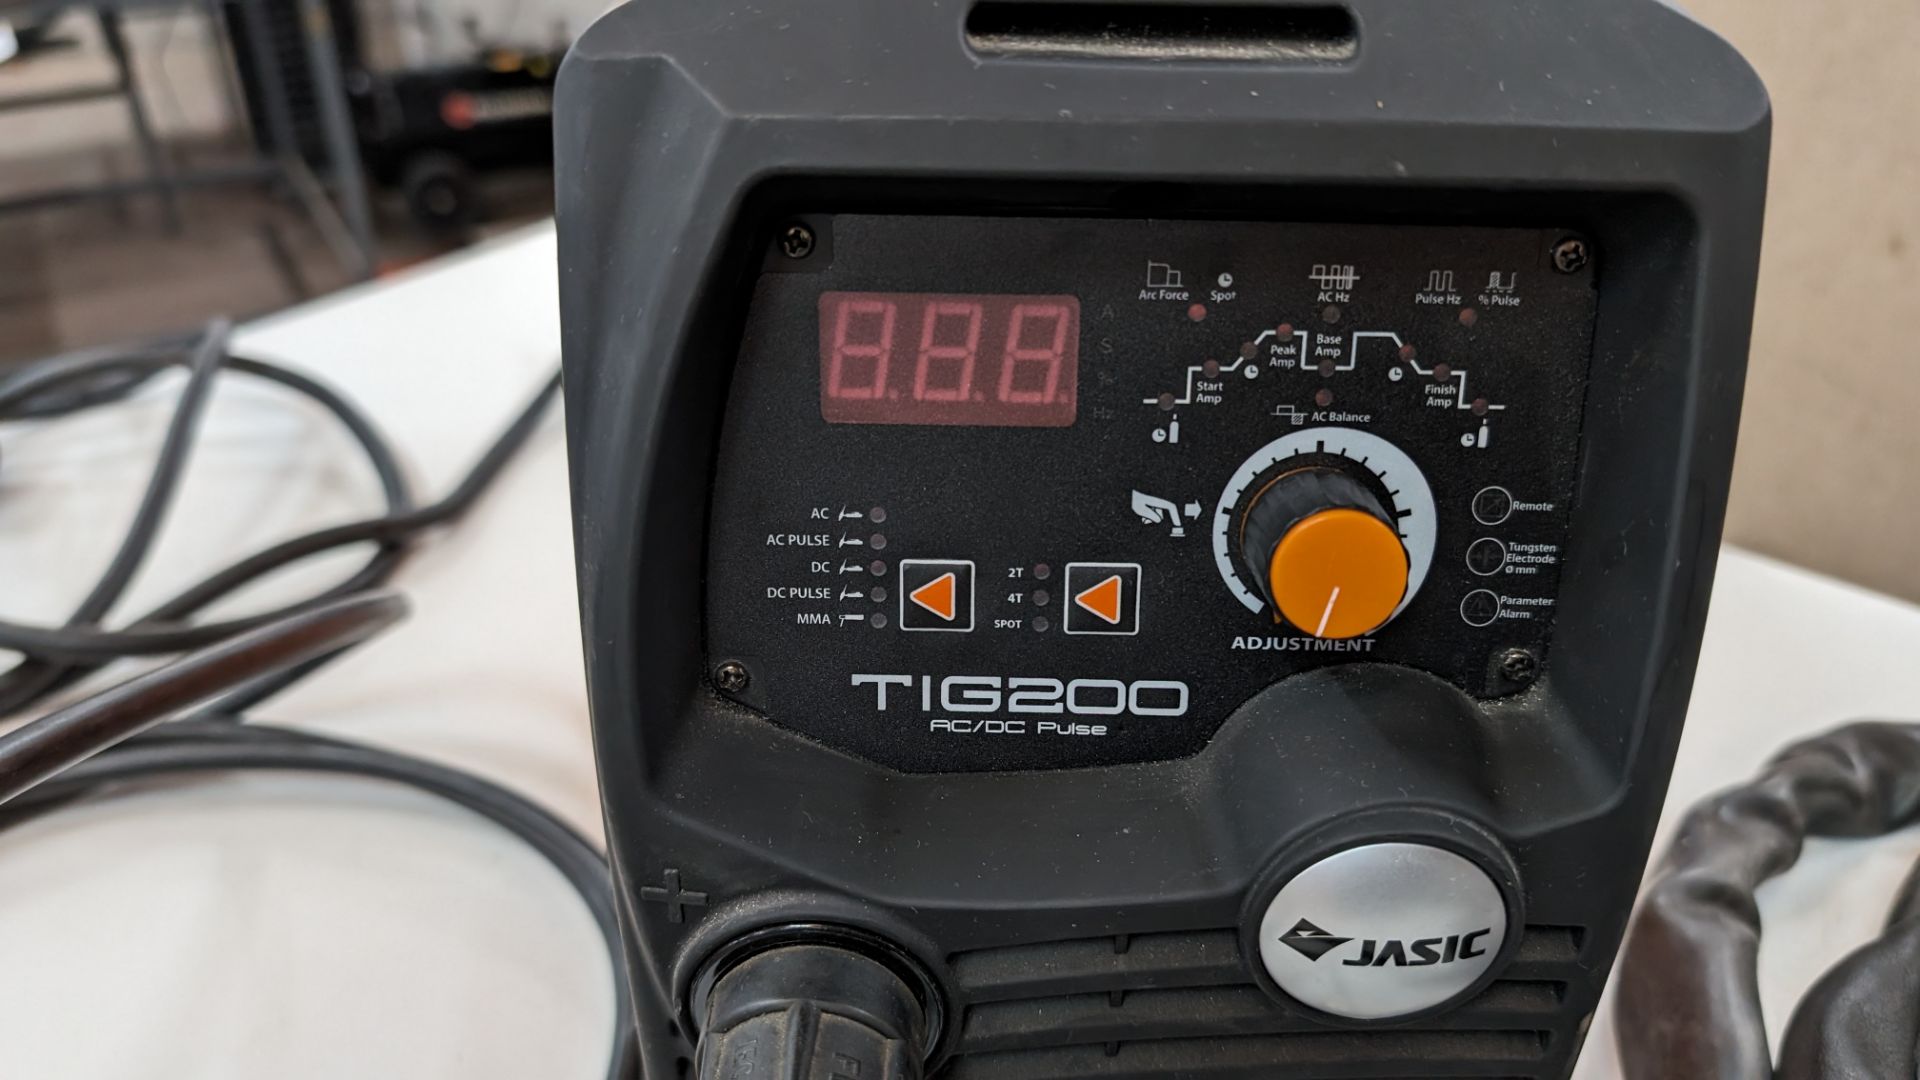 Jasic Pro tig 200 AC/DC pulse welder, including welding mask, box of consumables & other items as pi - Image 14 of 23